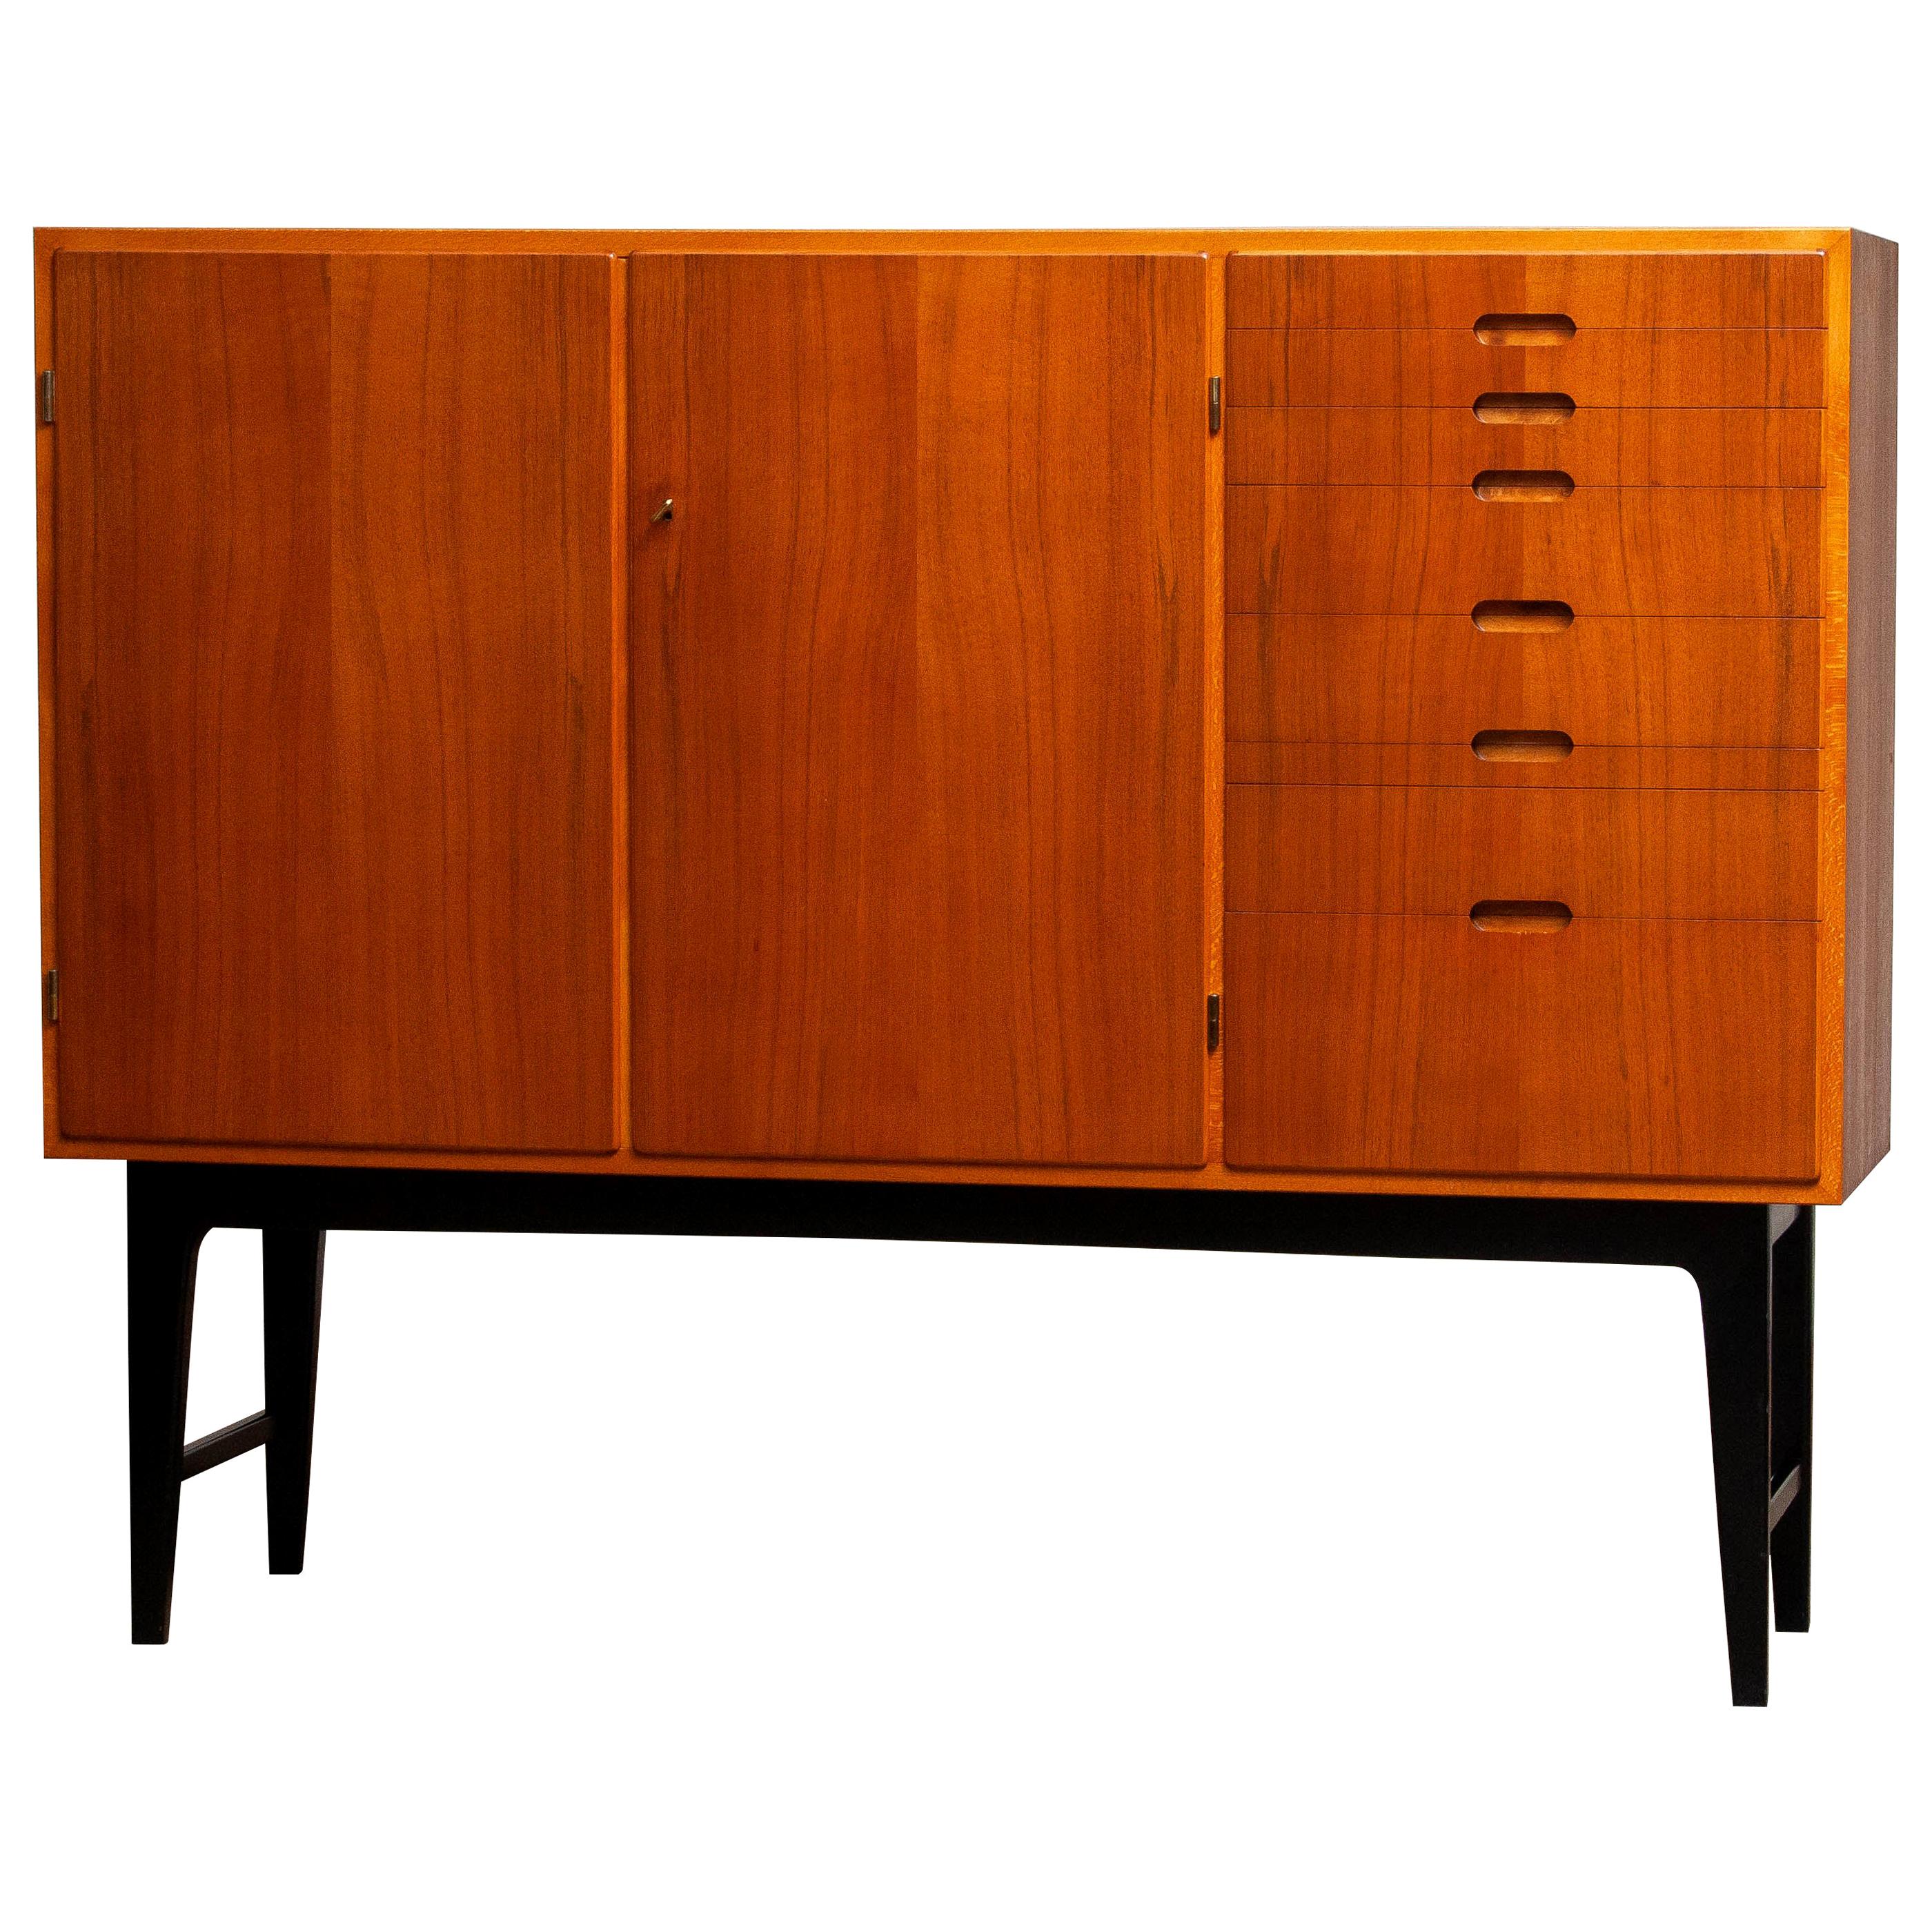 Extremely high quality and rare buffet cabinet / credenzas with seven drawers and an extendable shelf in very good condition designed by Kurt Karlsson for Löfvings Møbelfabrik Tibro.
On the left side are two lockable doors with four, adjustable,